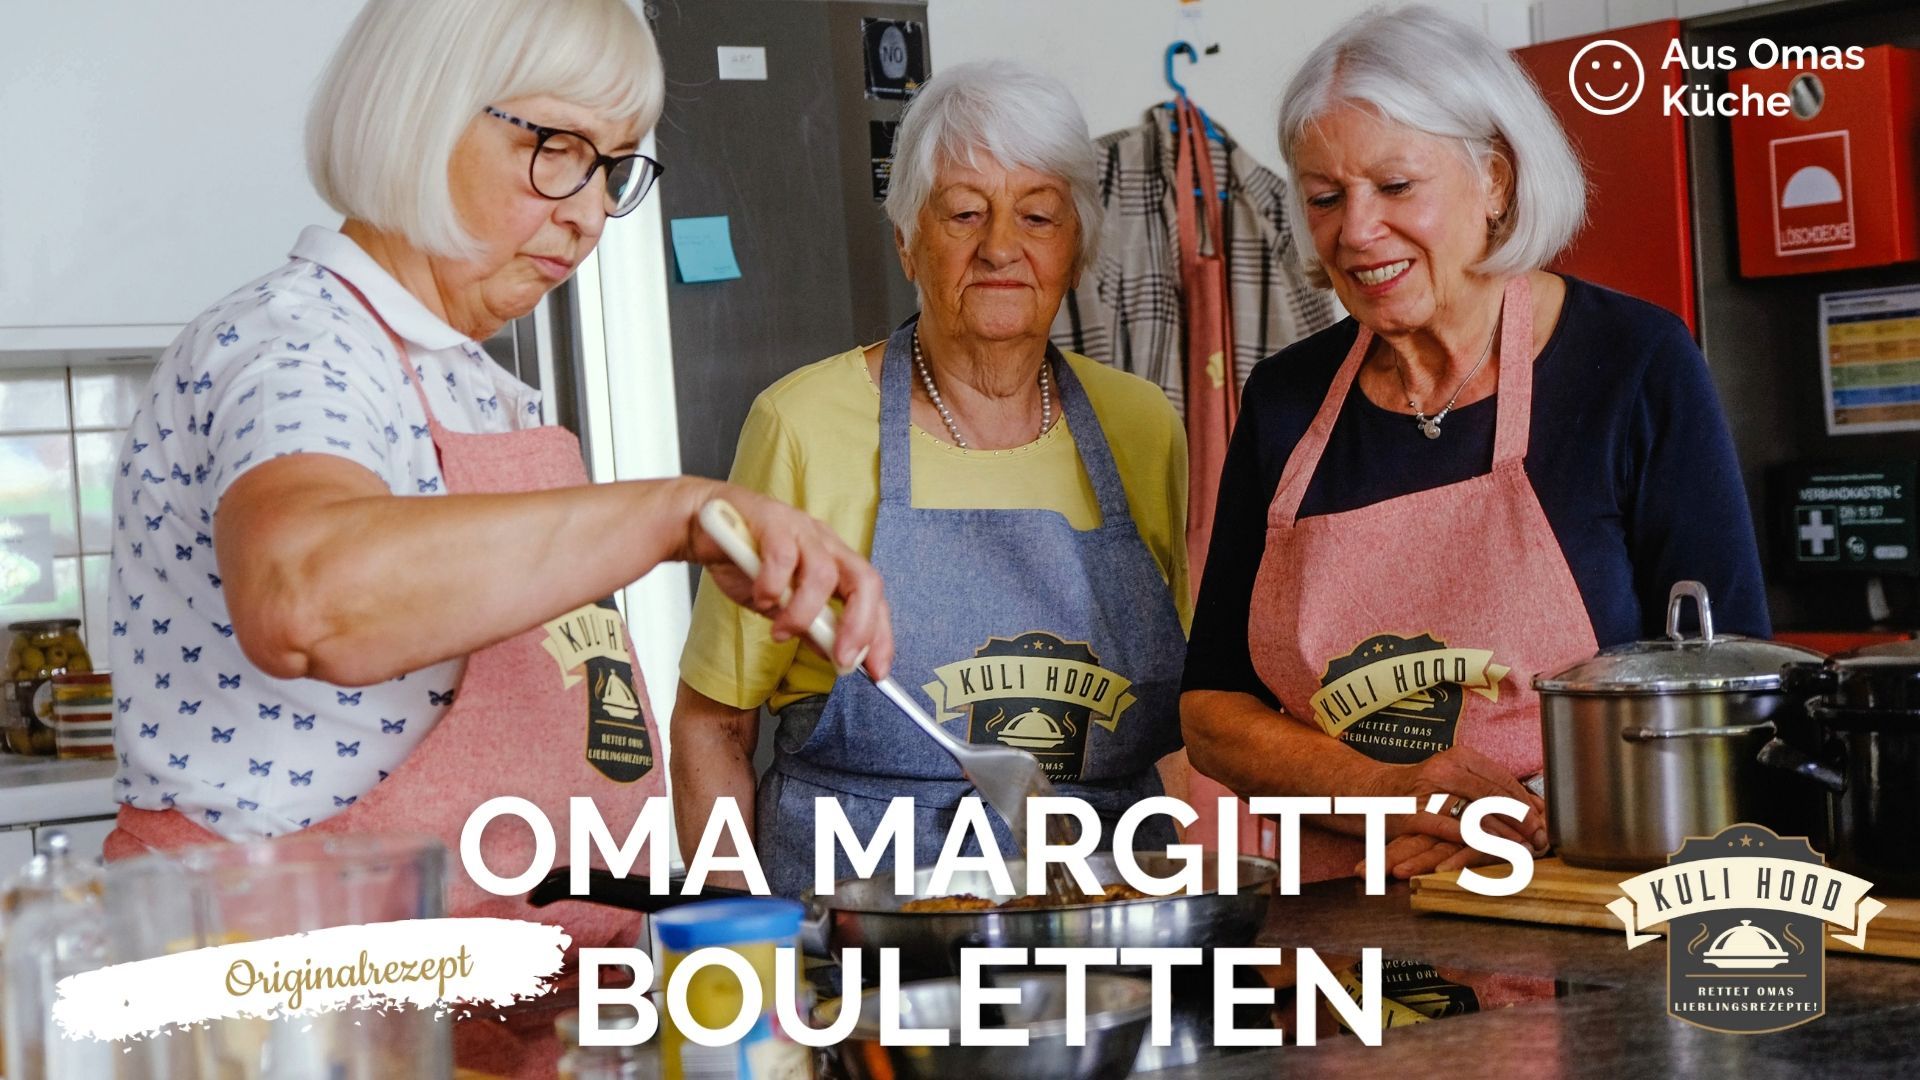 Recipes from grandma's kitchen: Bonn start-up saves senior citizens from loneliness